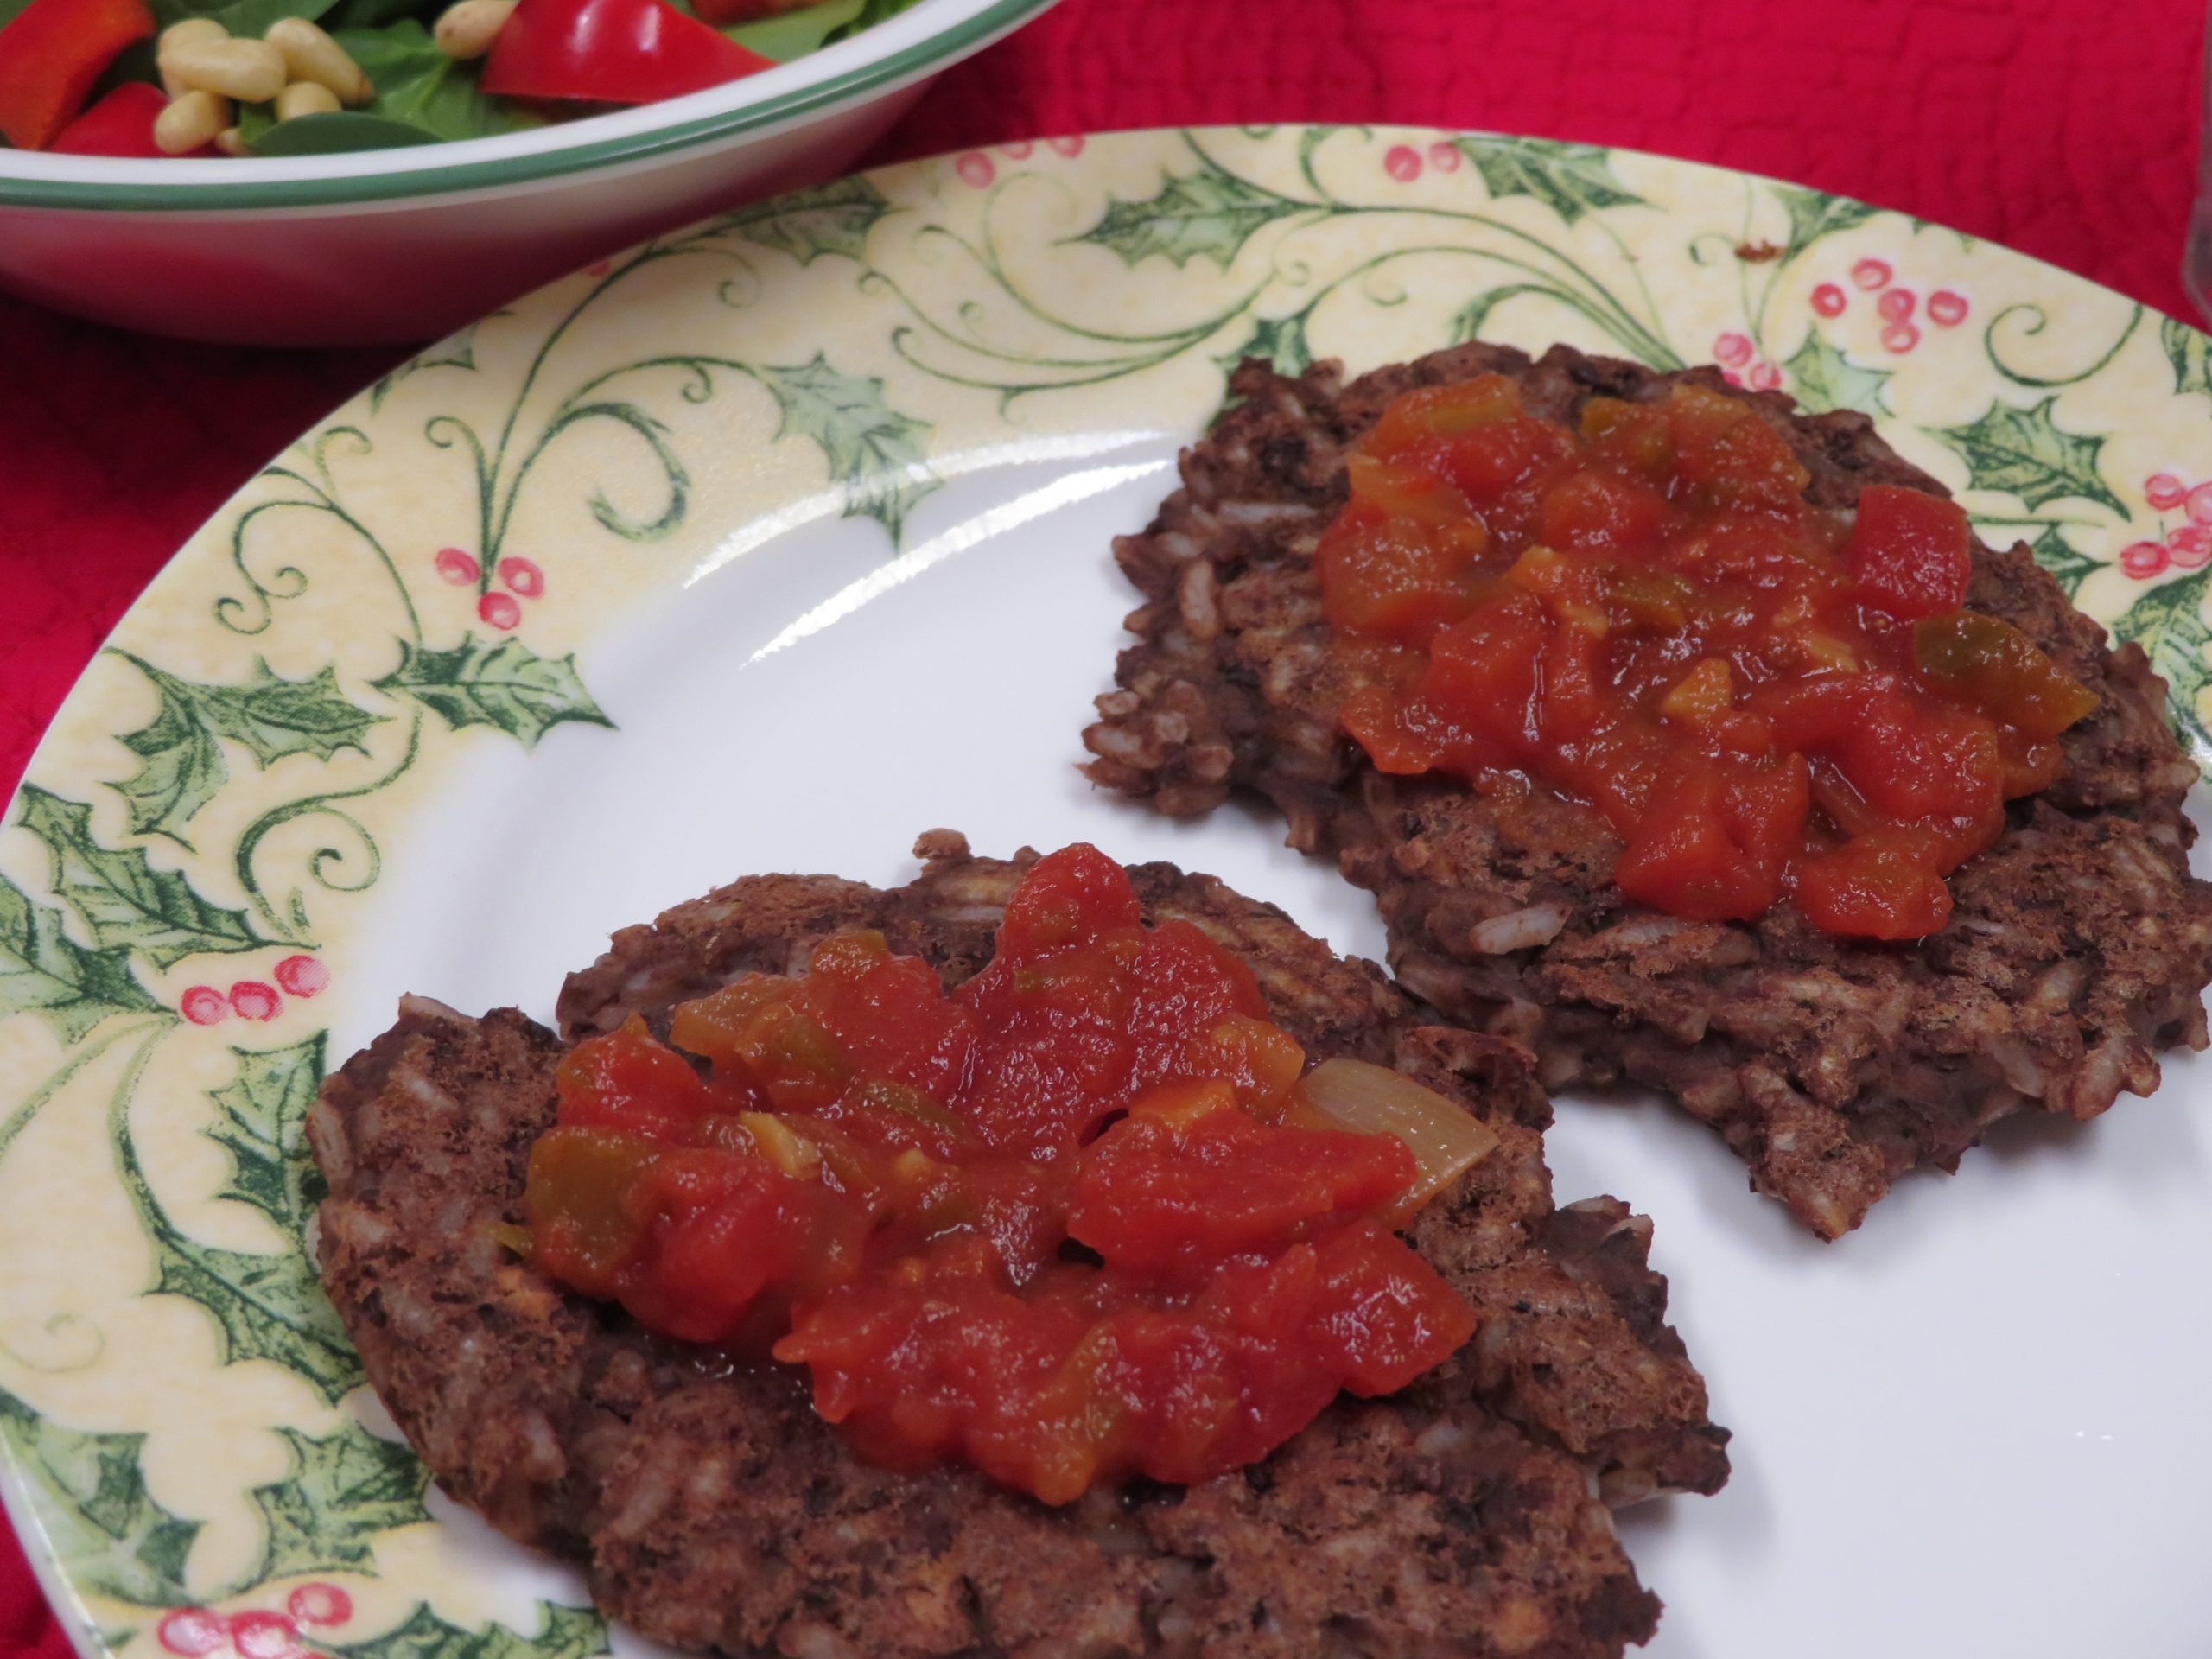 Two Bean and Rice Cakes with salsa on them sitting on a plate